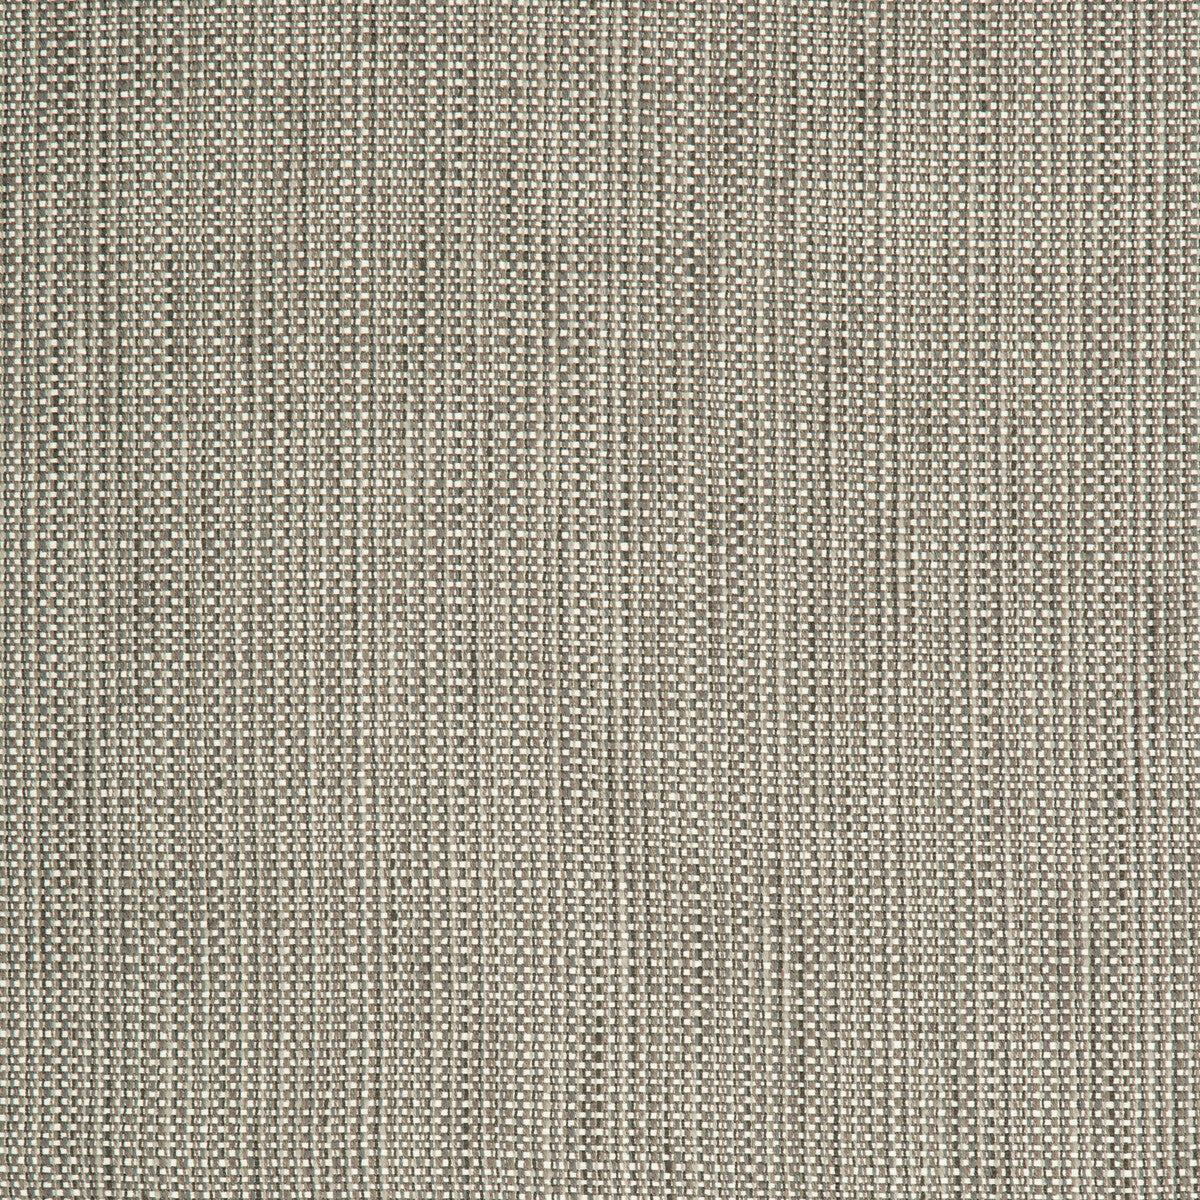 Kravet Smart fabric in 34627-21 color - pattern 34627.21.0 - by Kravet Smart in the Performance Crypton Home collection